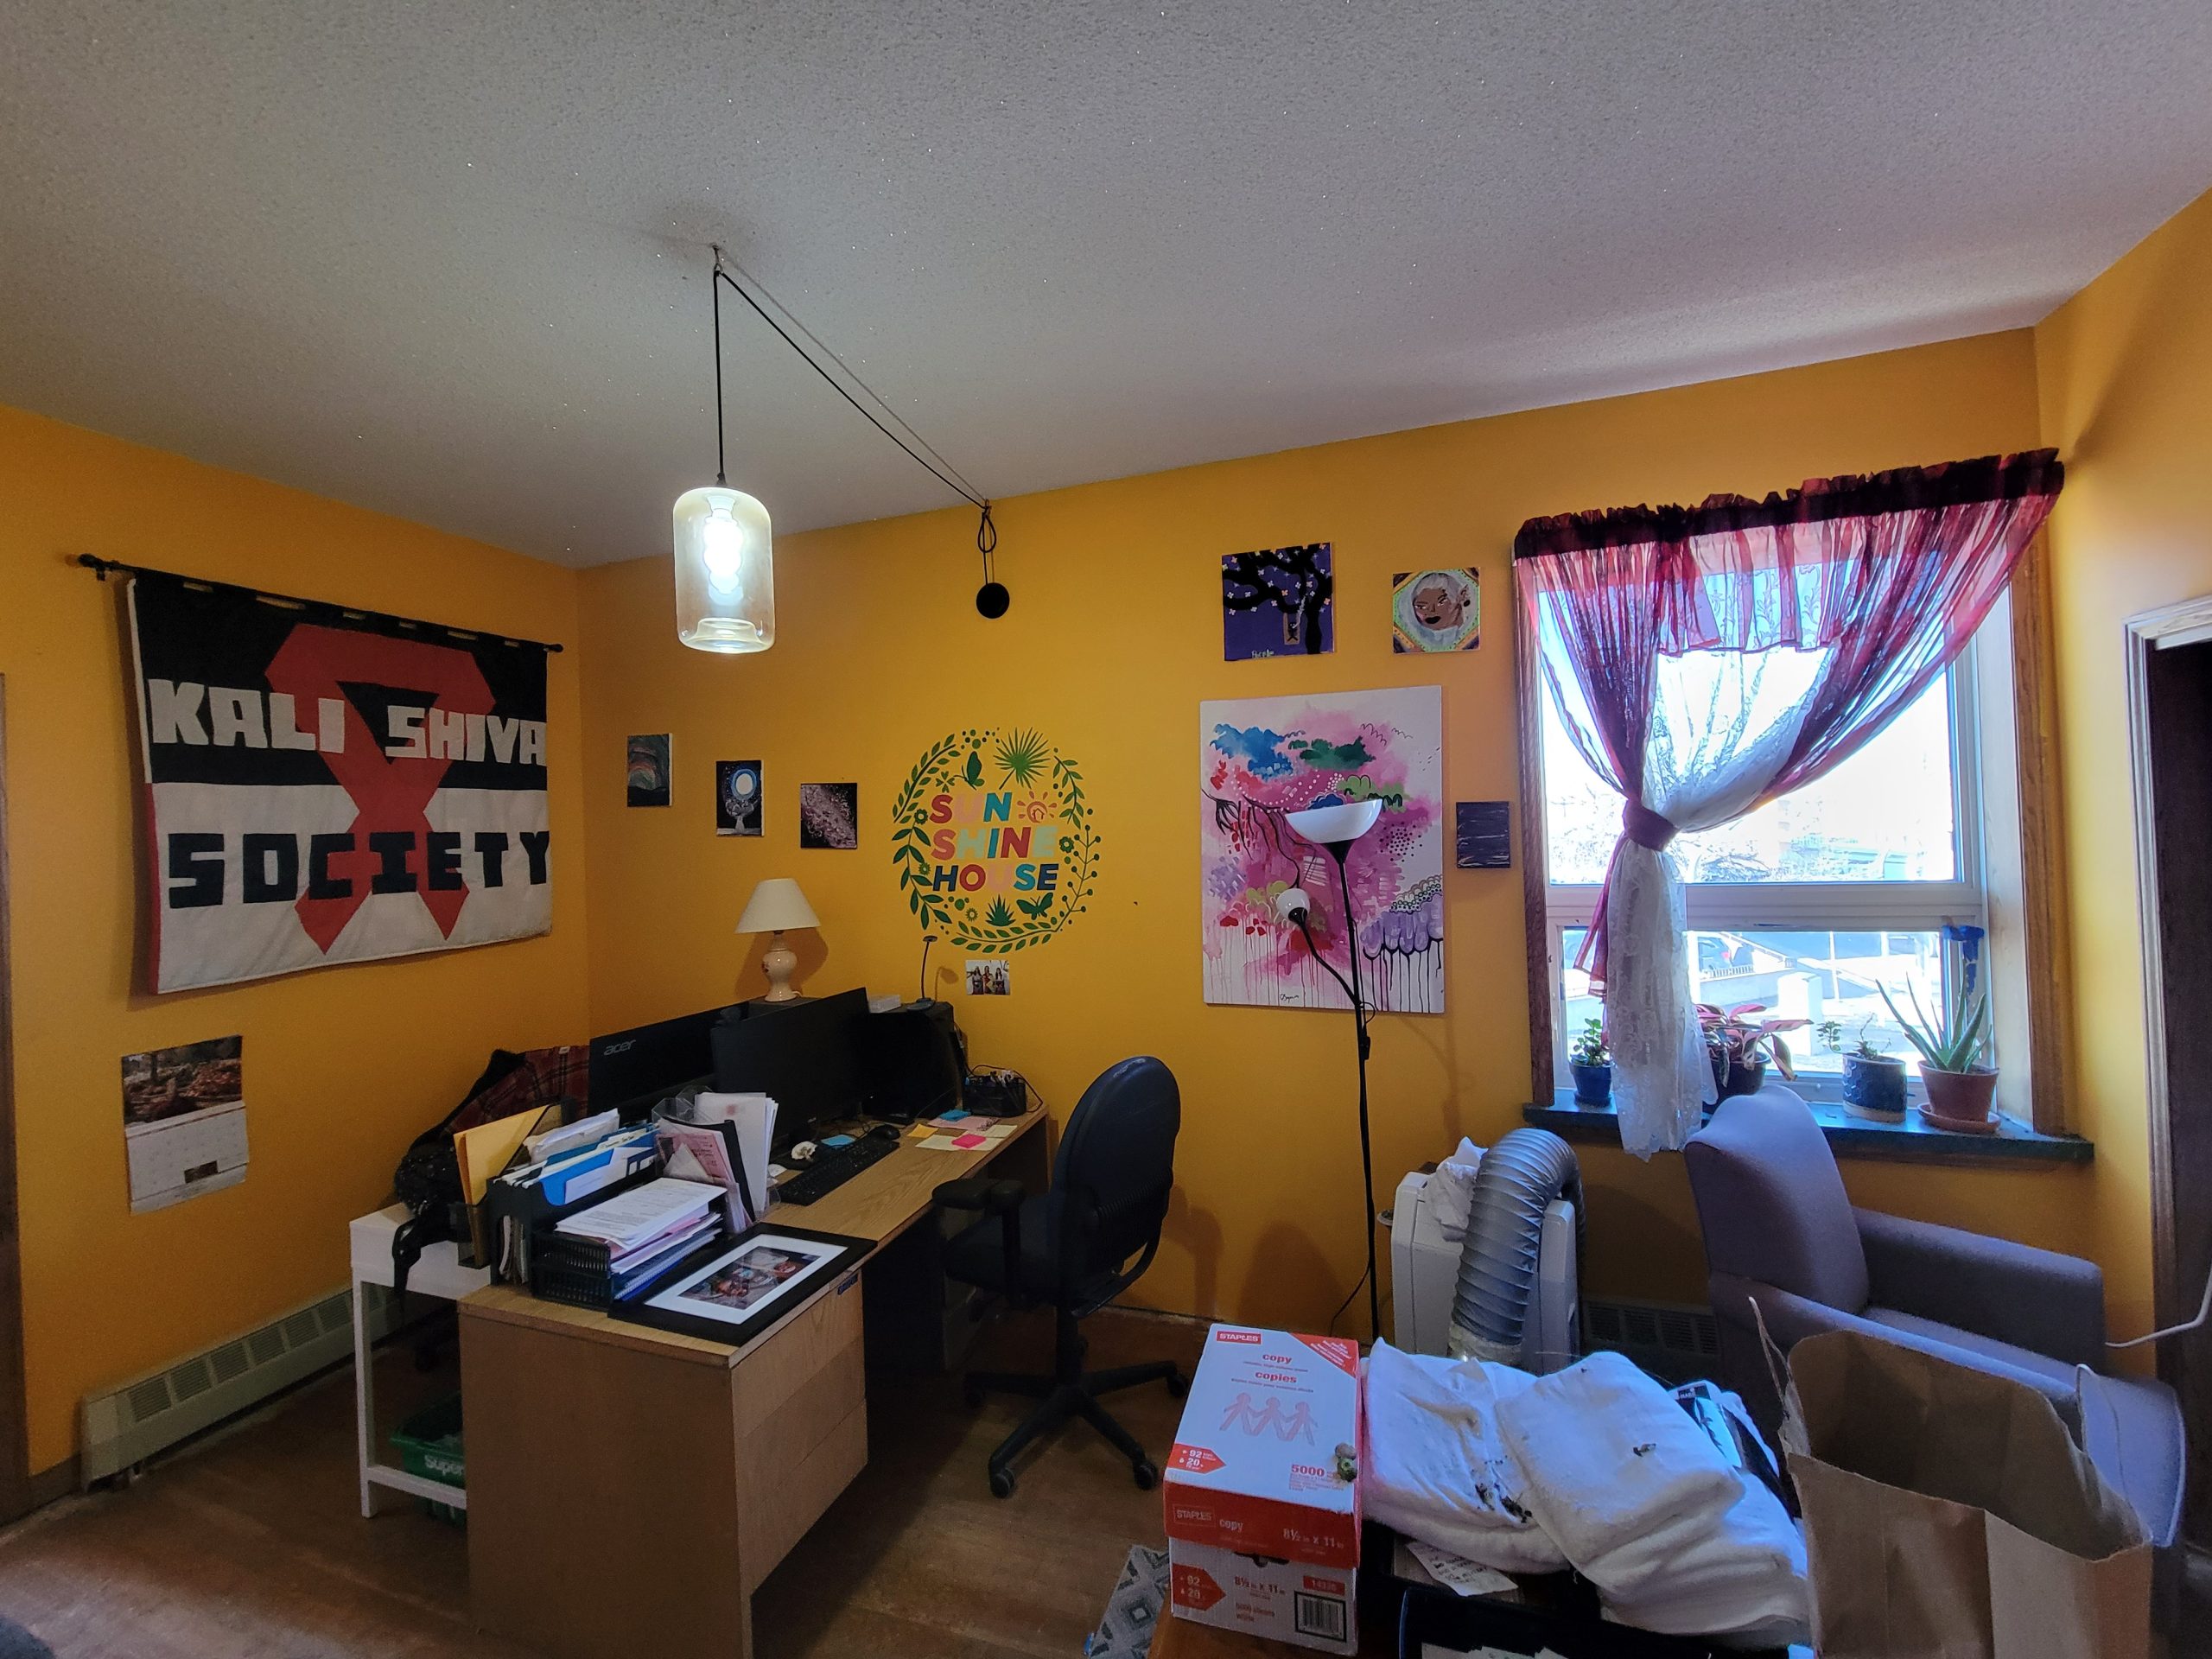 Office space on the upper floor of Sunshine House. The walls are painted bright yellow and there is a black, white, and red flag on the wall that says "Kali Shiva Society".